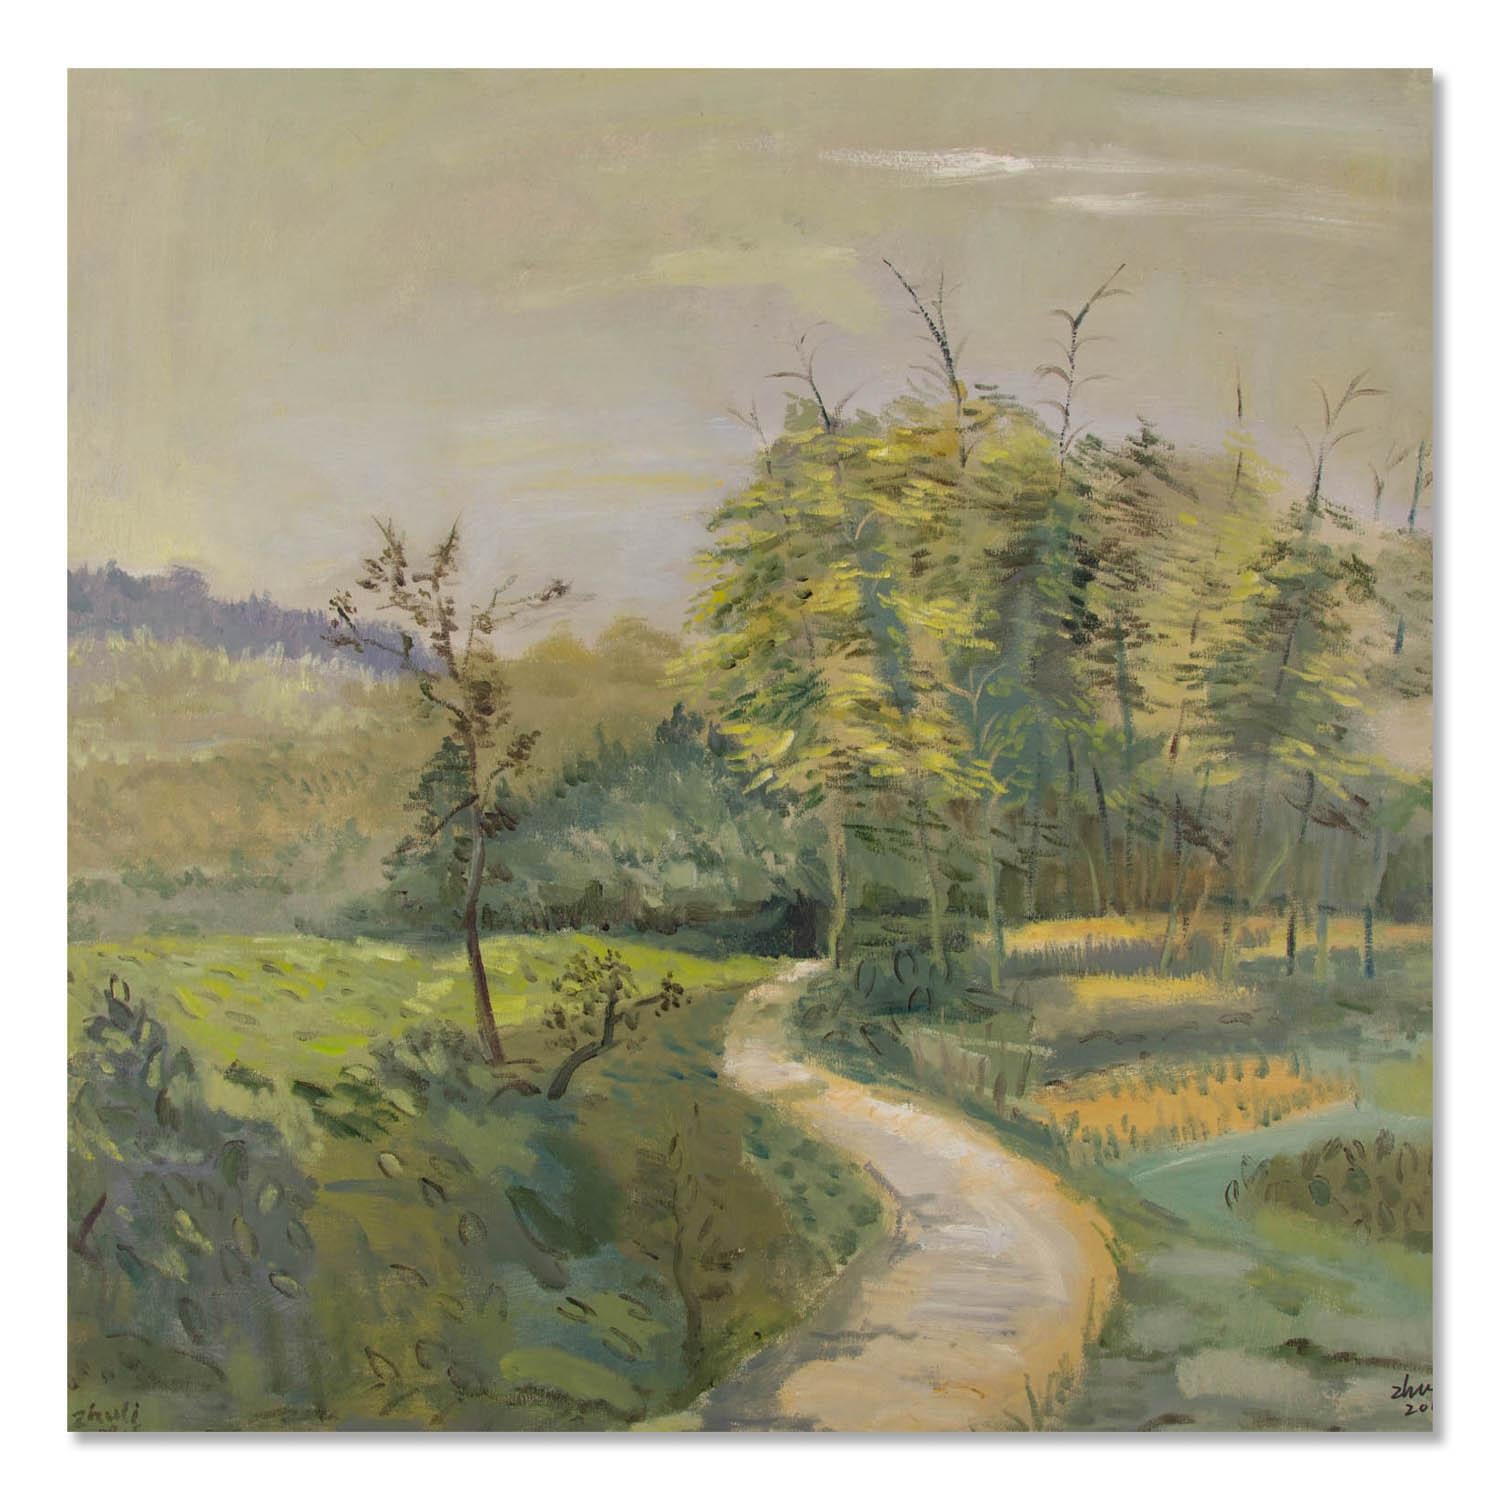  Title: Small Path
 Medium: Oil on canvas
 Size: 29 x 29 inches
 Frame: Framing options available!
 Condition: The painting appears to be in excellent condition.
 
 Year: 2012
 Artist: Li Zhu
 Signature: Signed
 Signature Location: Lower right
